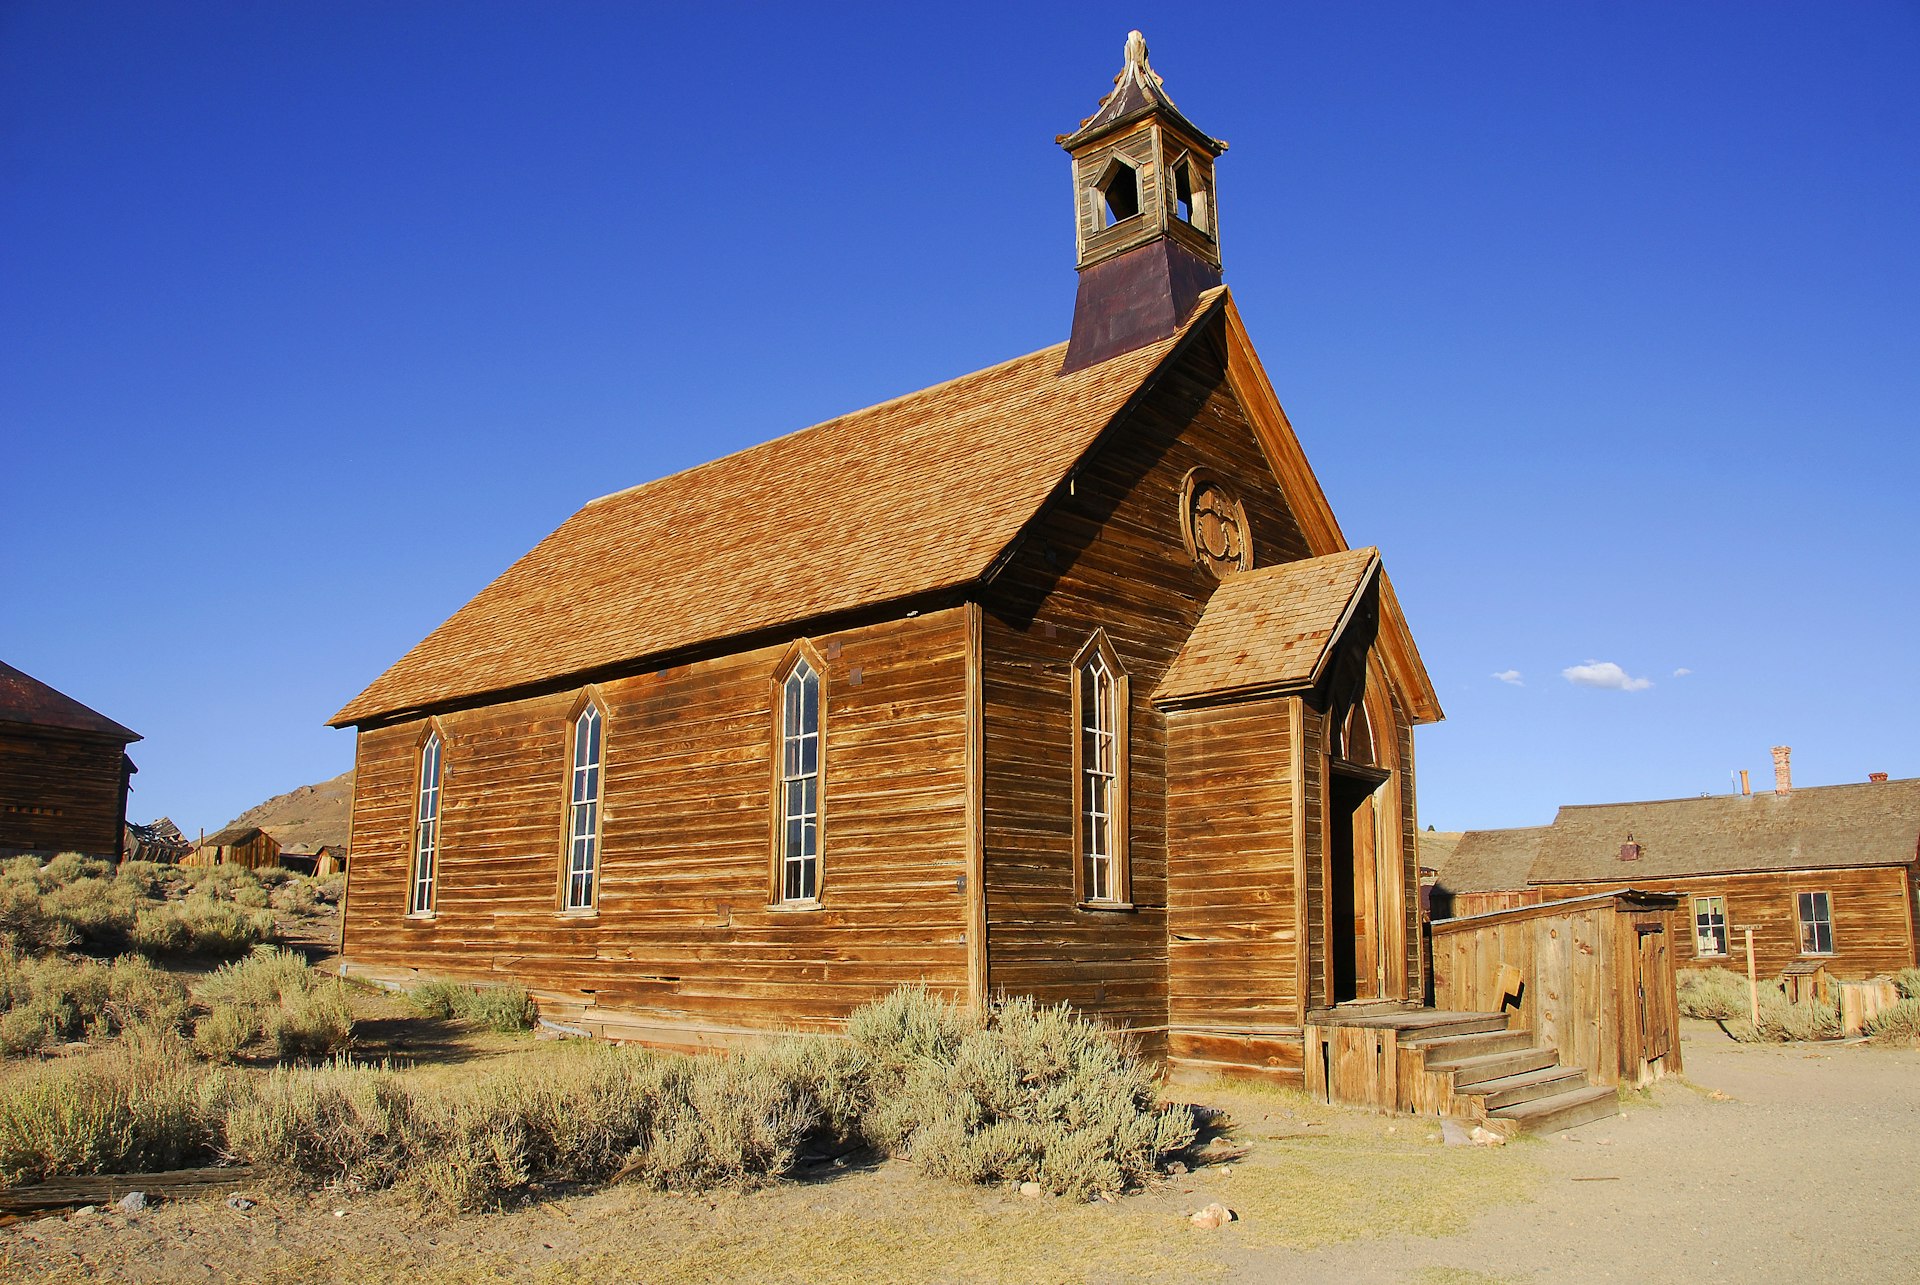 A deserted building in Bodie State Park, part of California's Lost Sierra 